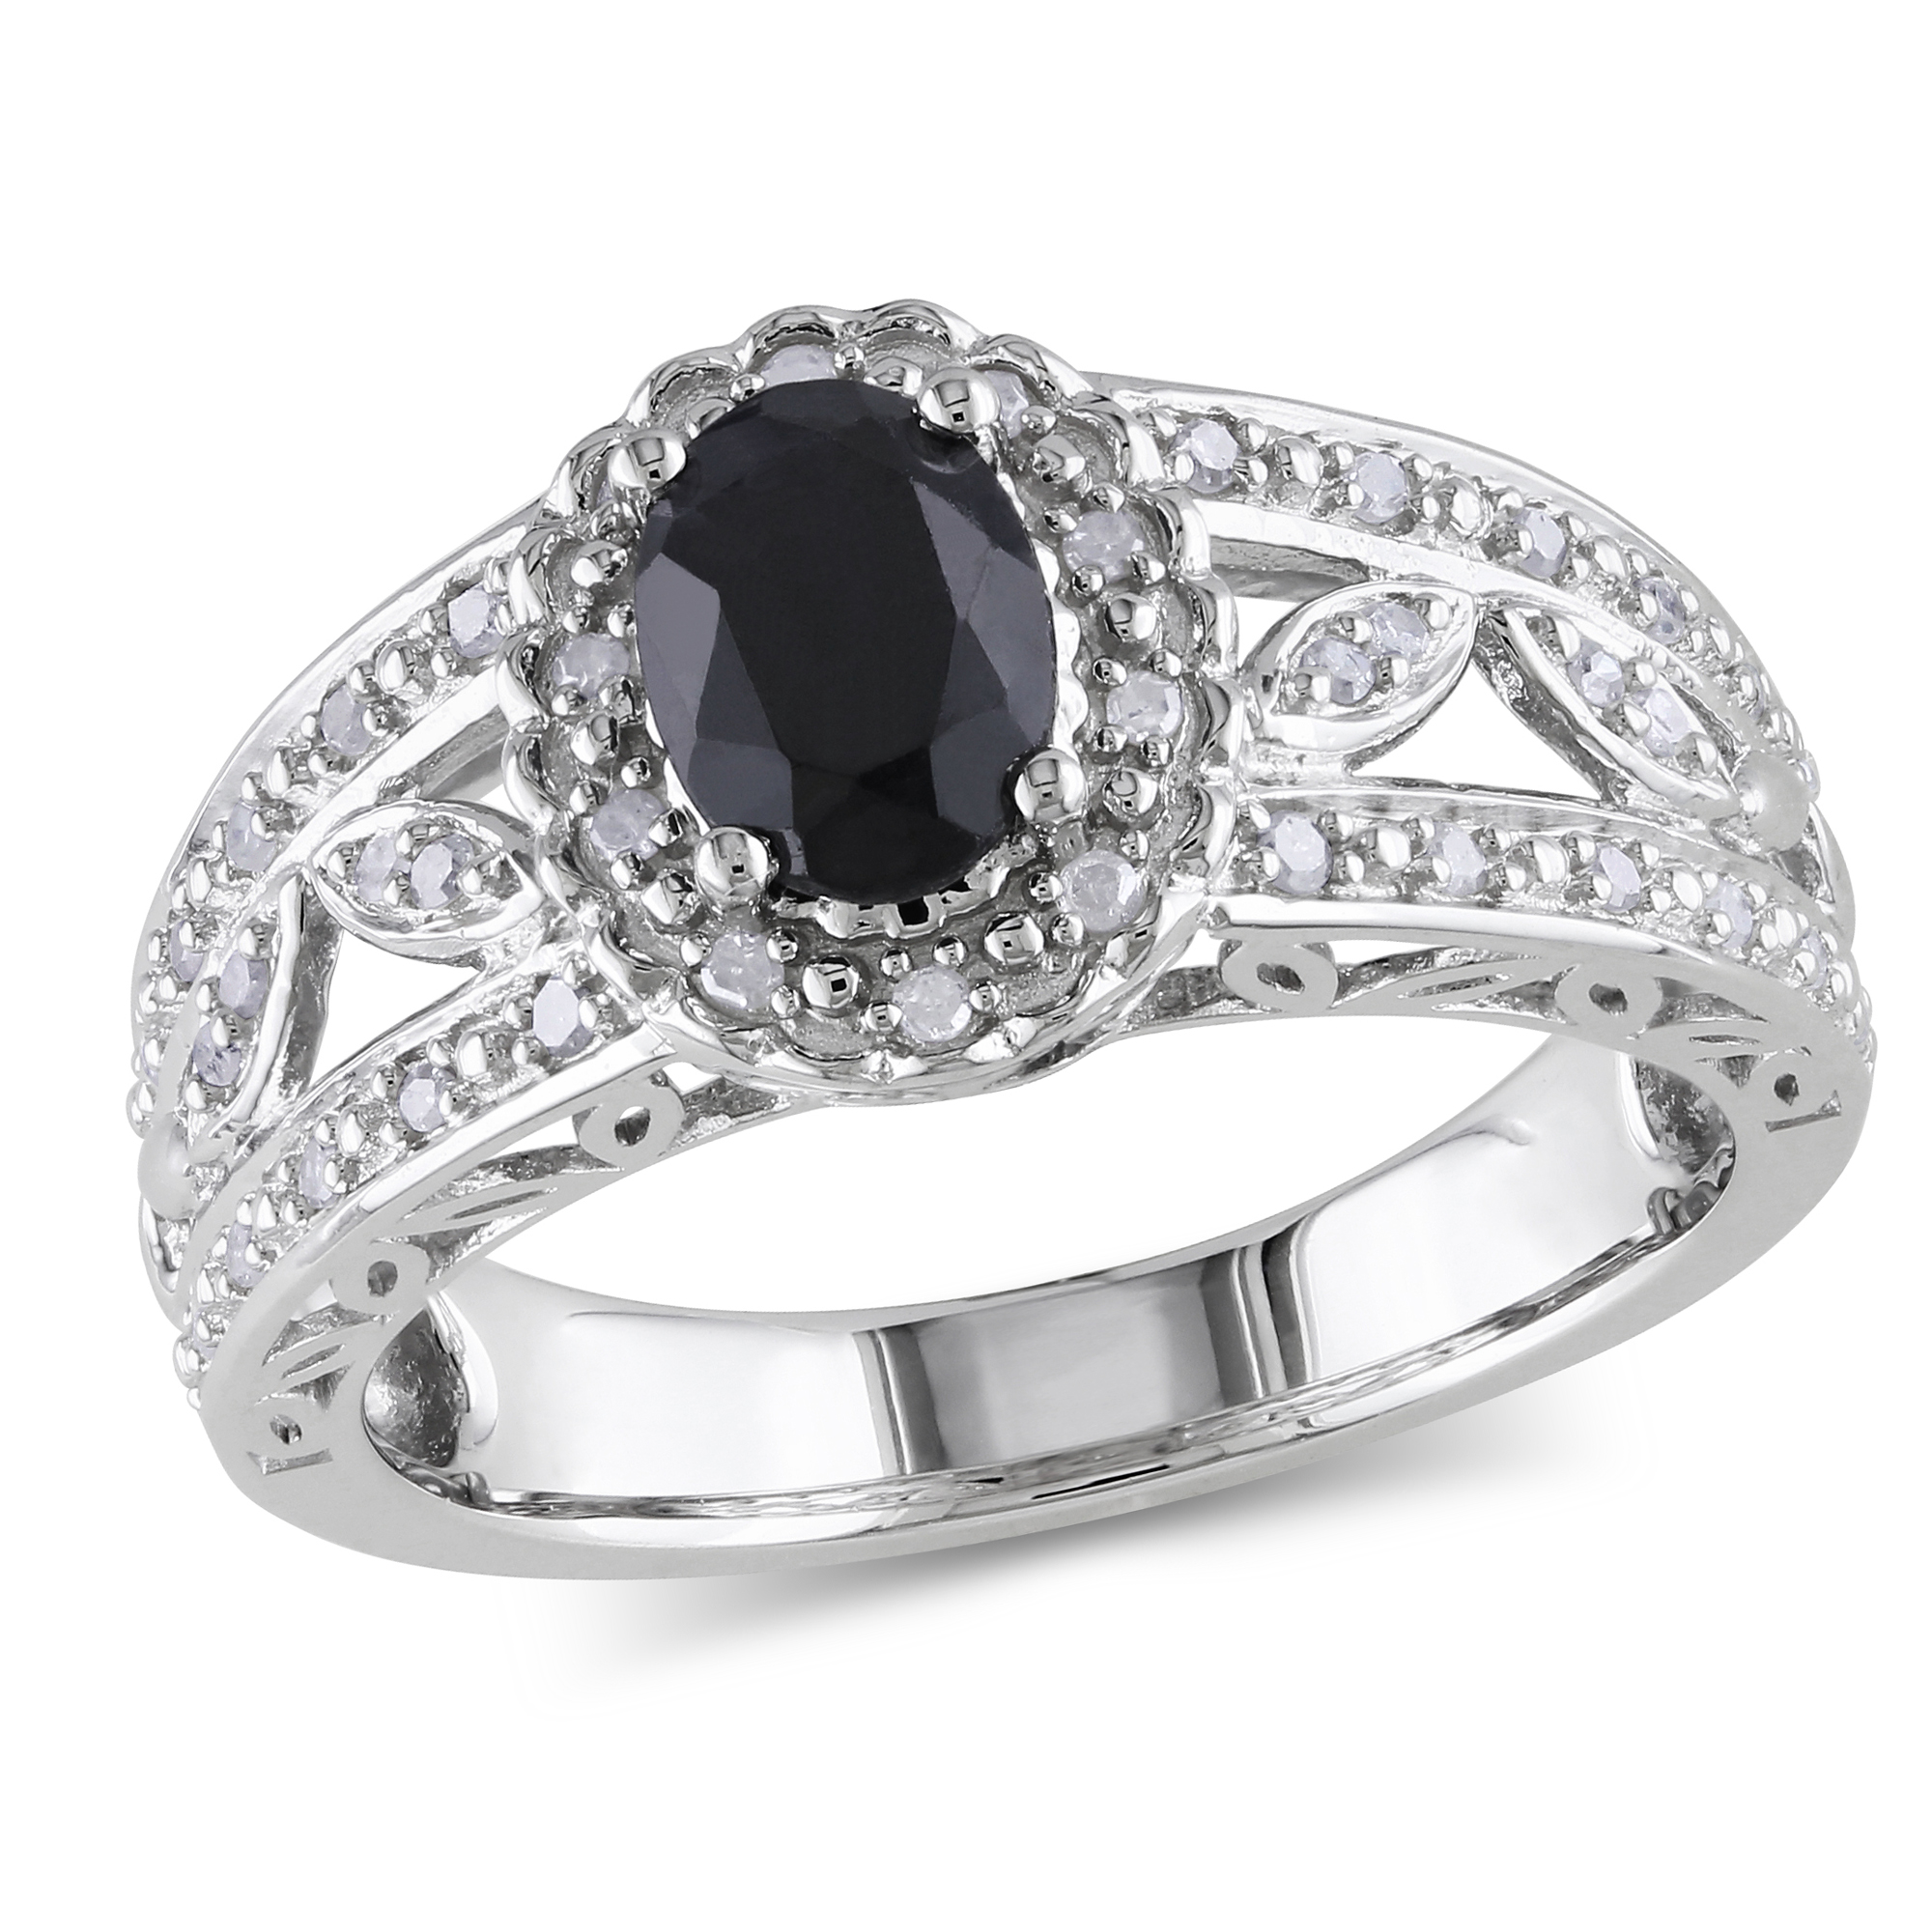 Amour 1/5 Carat T.W. Diamond and 1 Carat T.G.W. Black Sapphire Fashion Ring in Sterling Silver I3